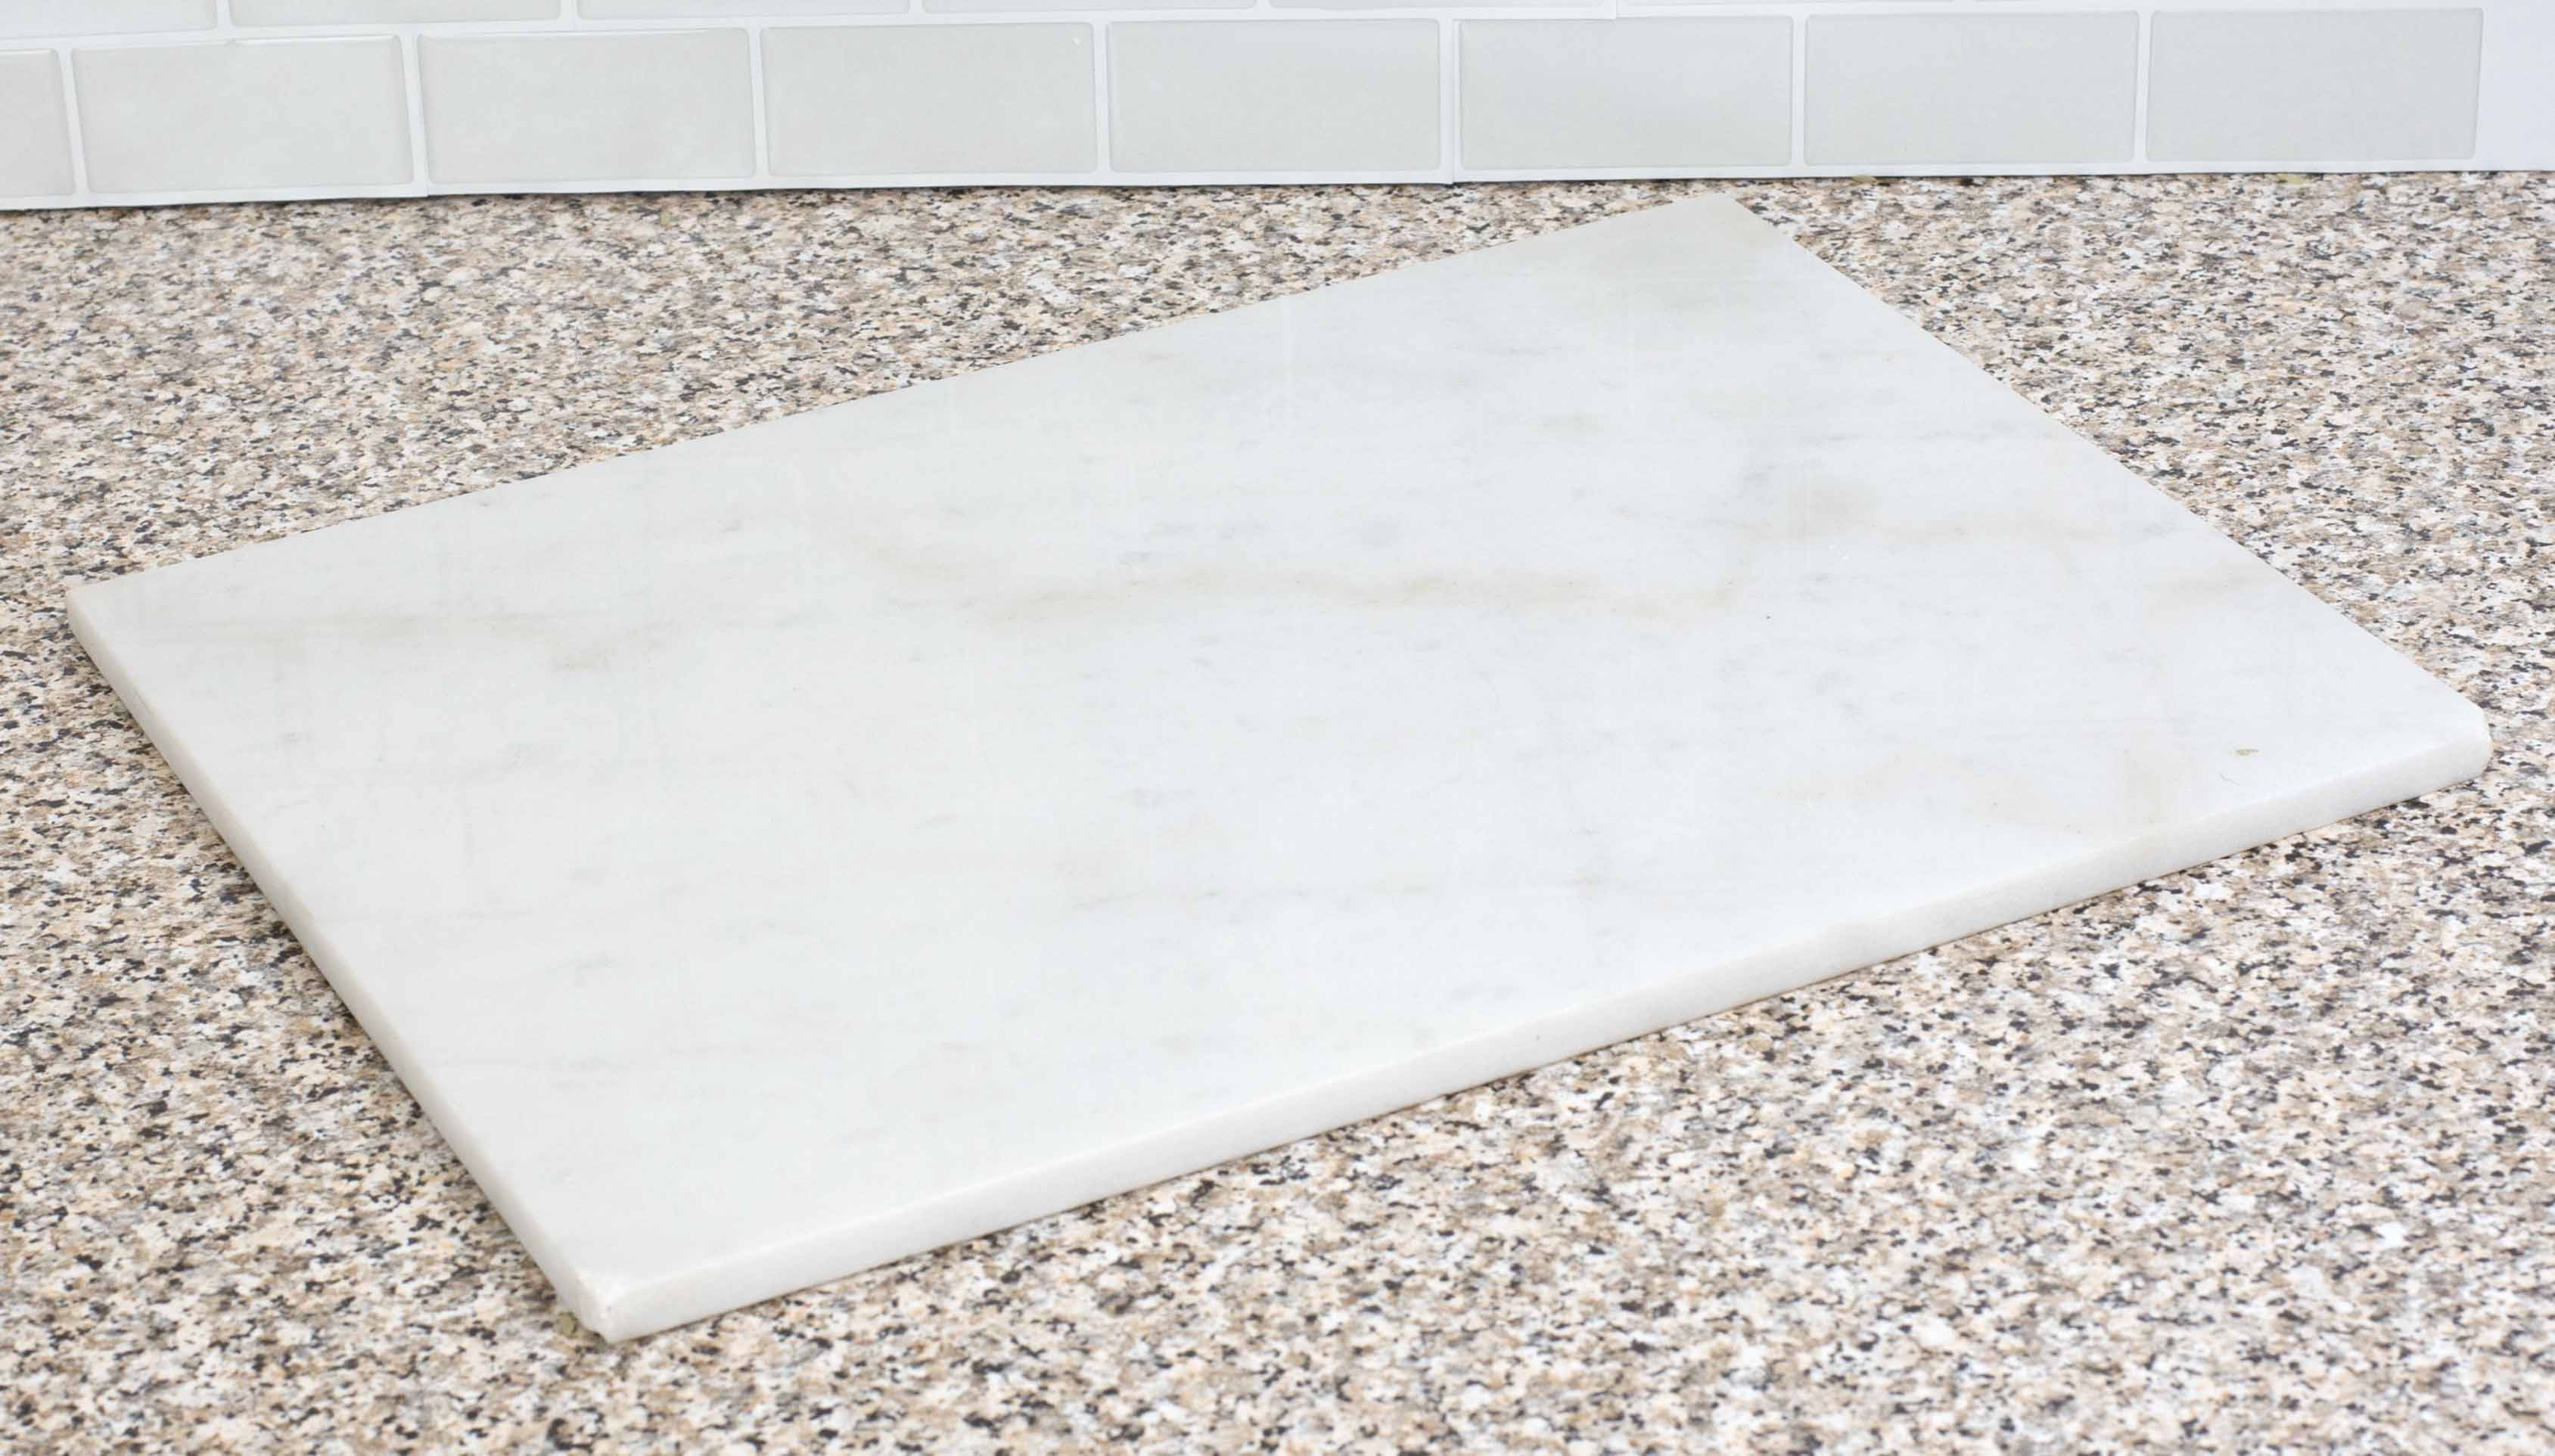 Home Basics 12" x 16" Marble Cutting Board, White - image 3 of 9